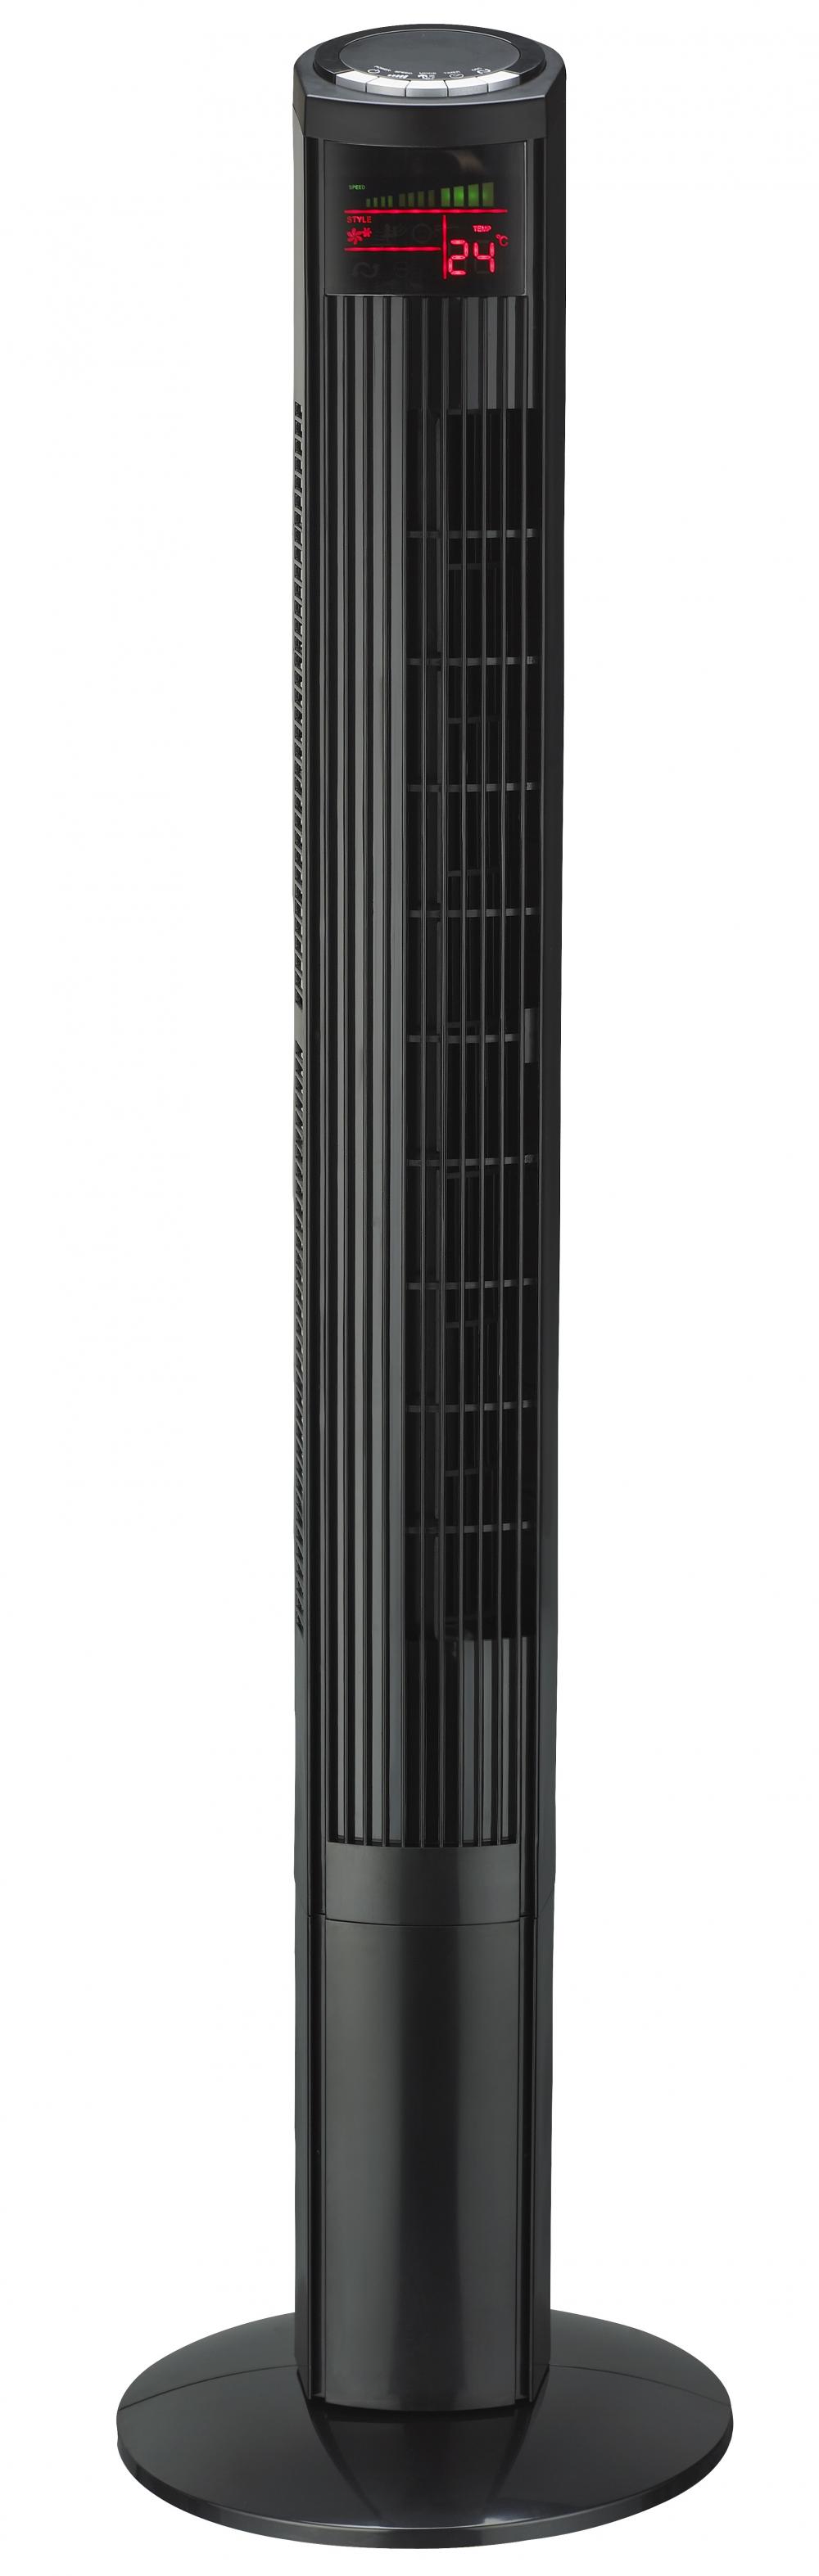 47 Inch Tower Fan With Remote Control